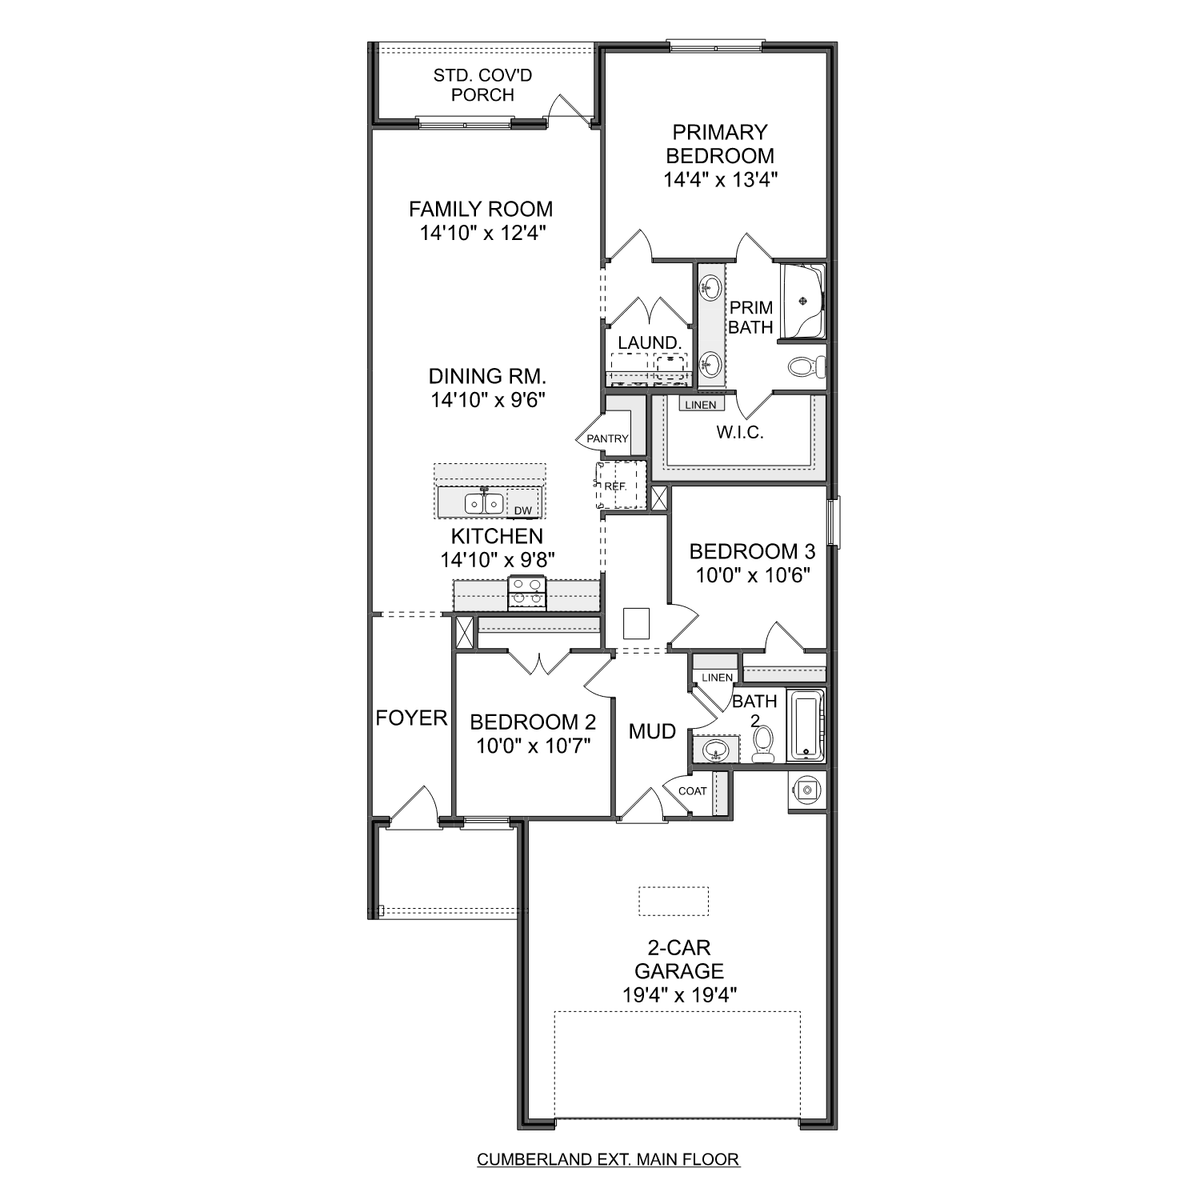 1 - The Cumberland D floor plan layout for 3148 Mead Way SE in Davidson Homes' Hollon Meadow community.